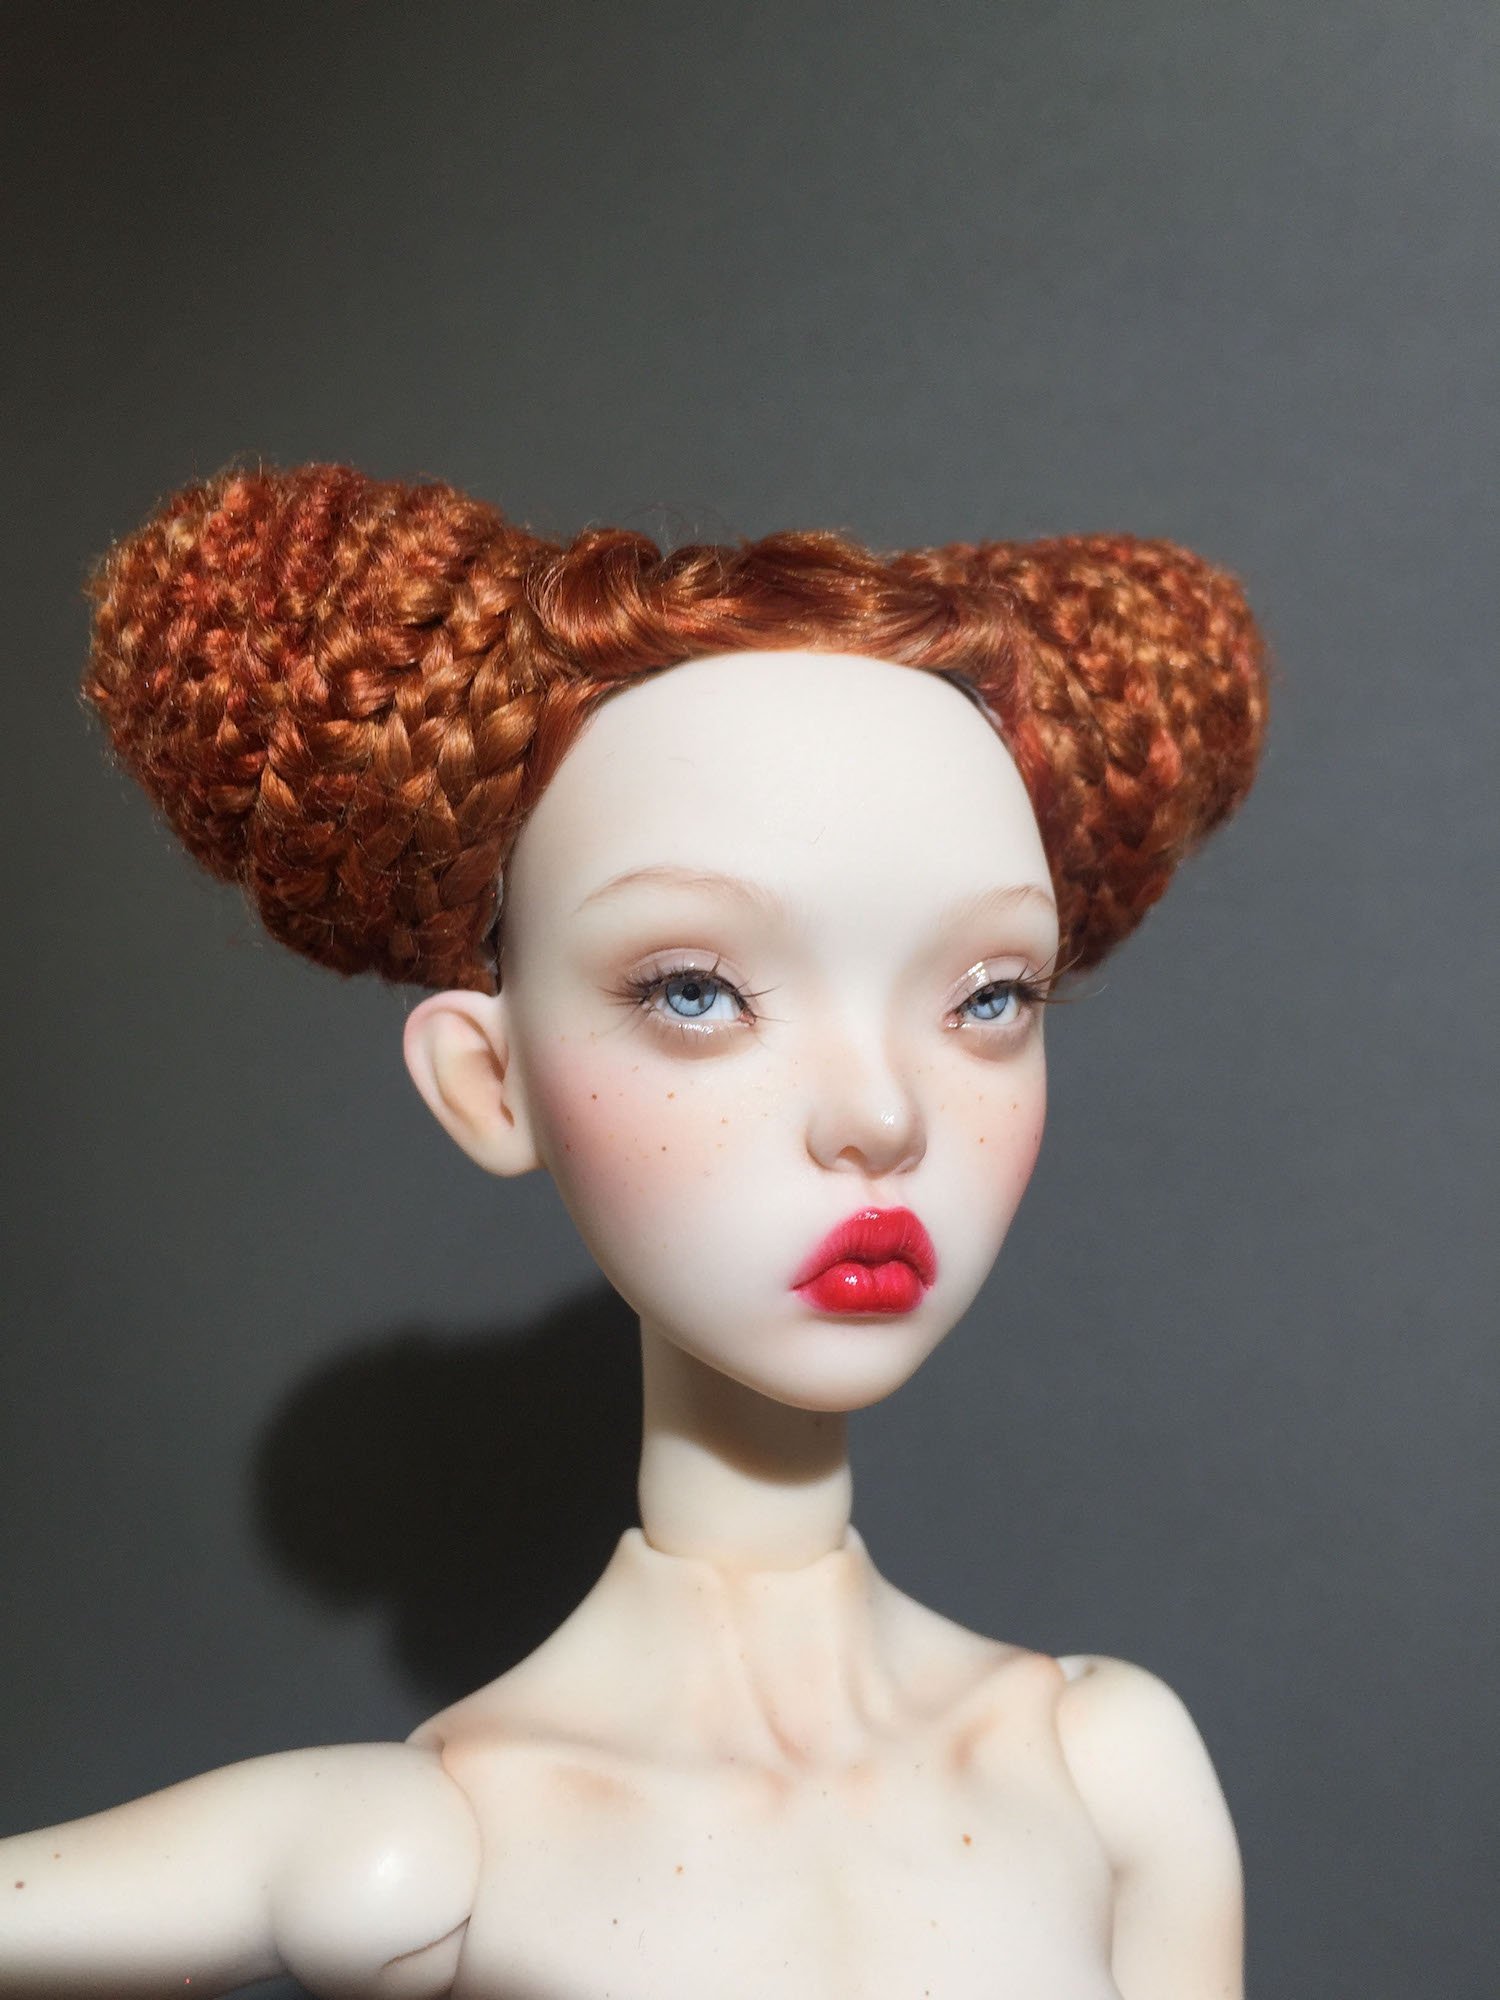 ball jointed doll art